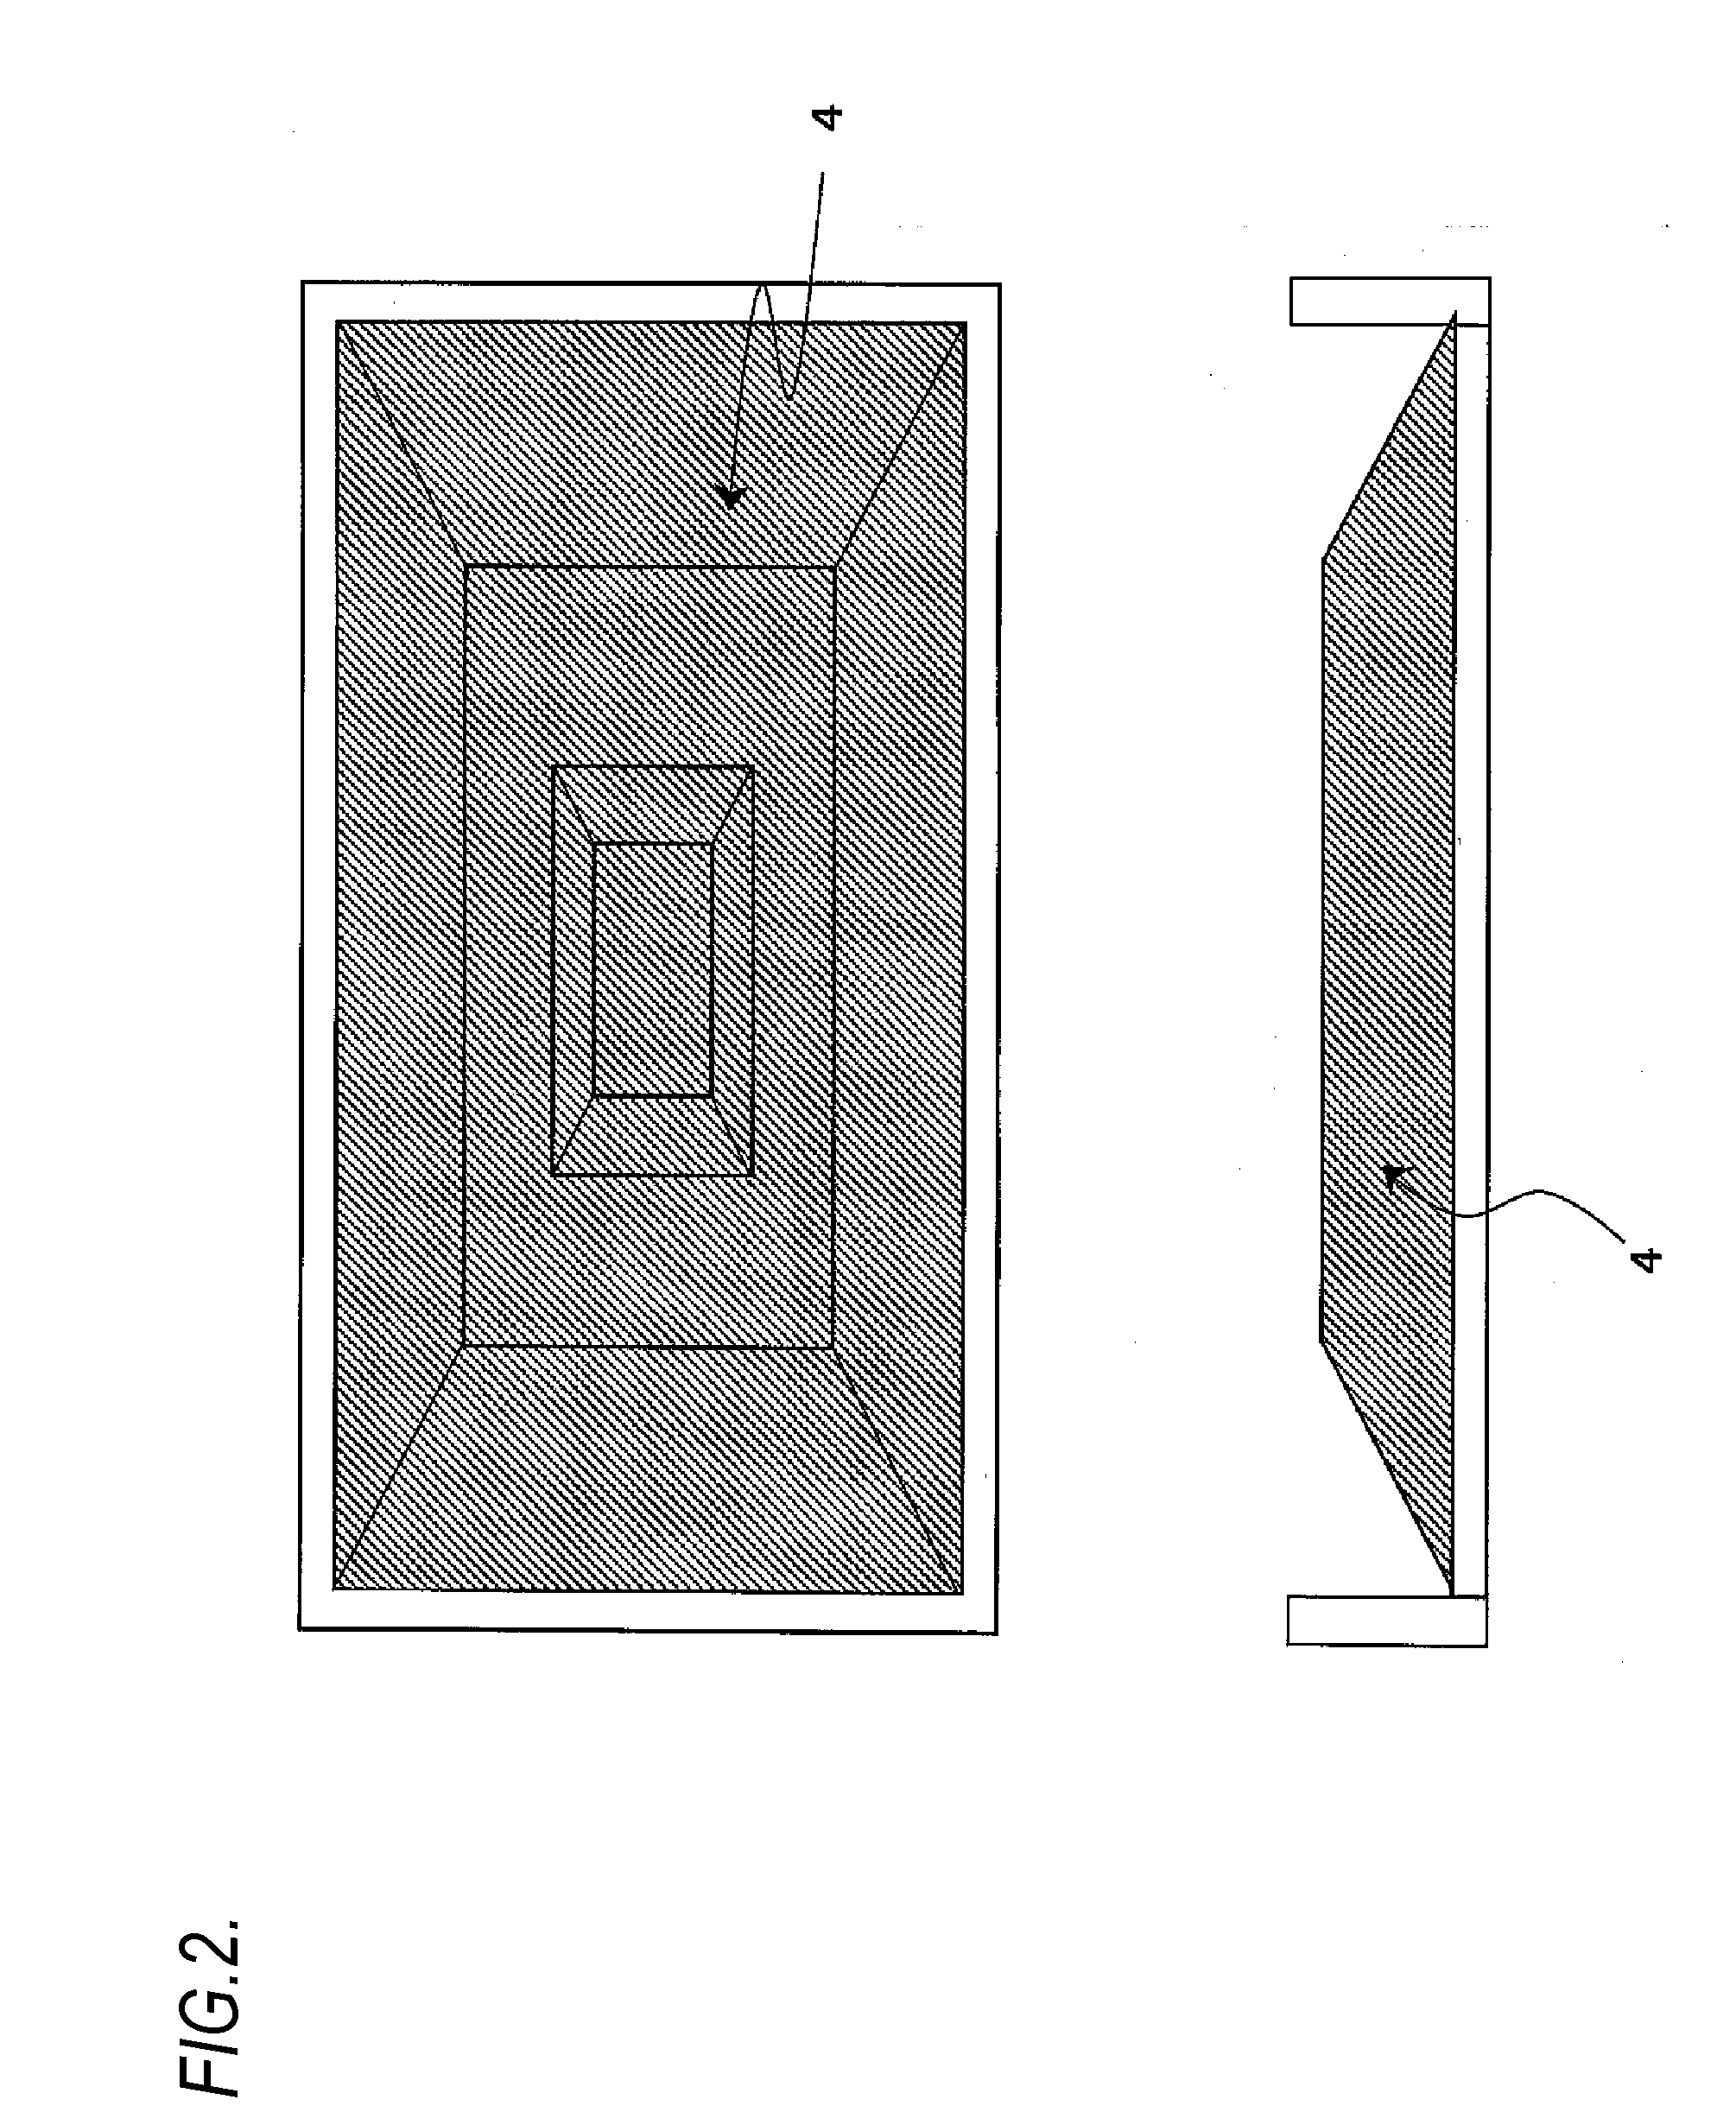 Method for Manufacturing Shaped Product with Maintained Isotropy